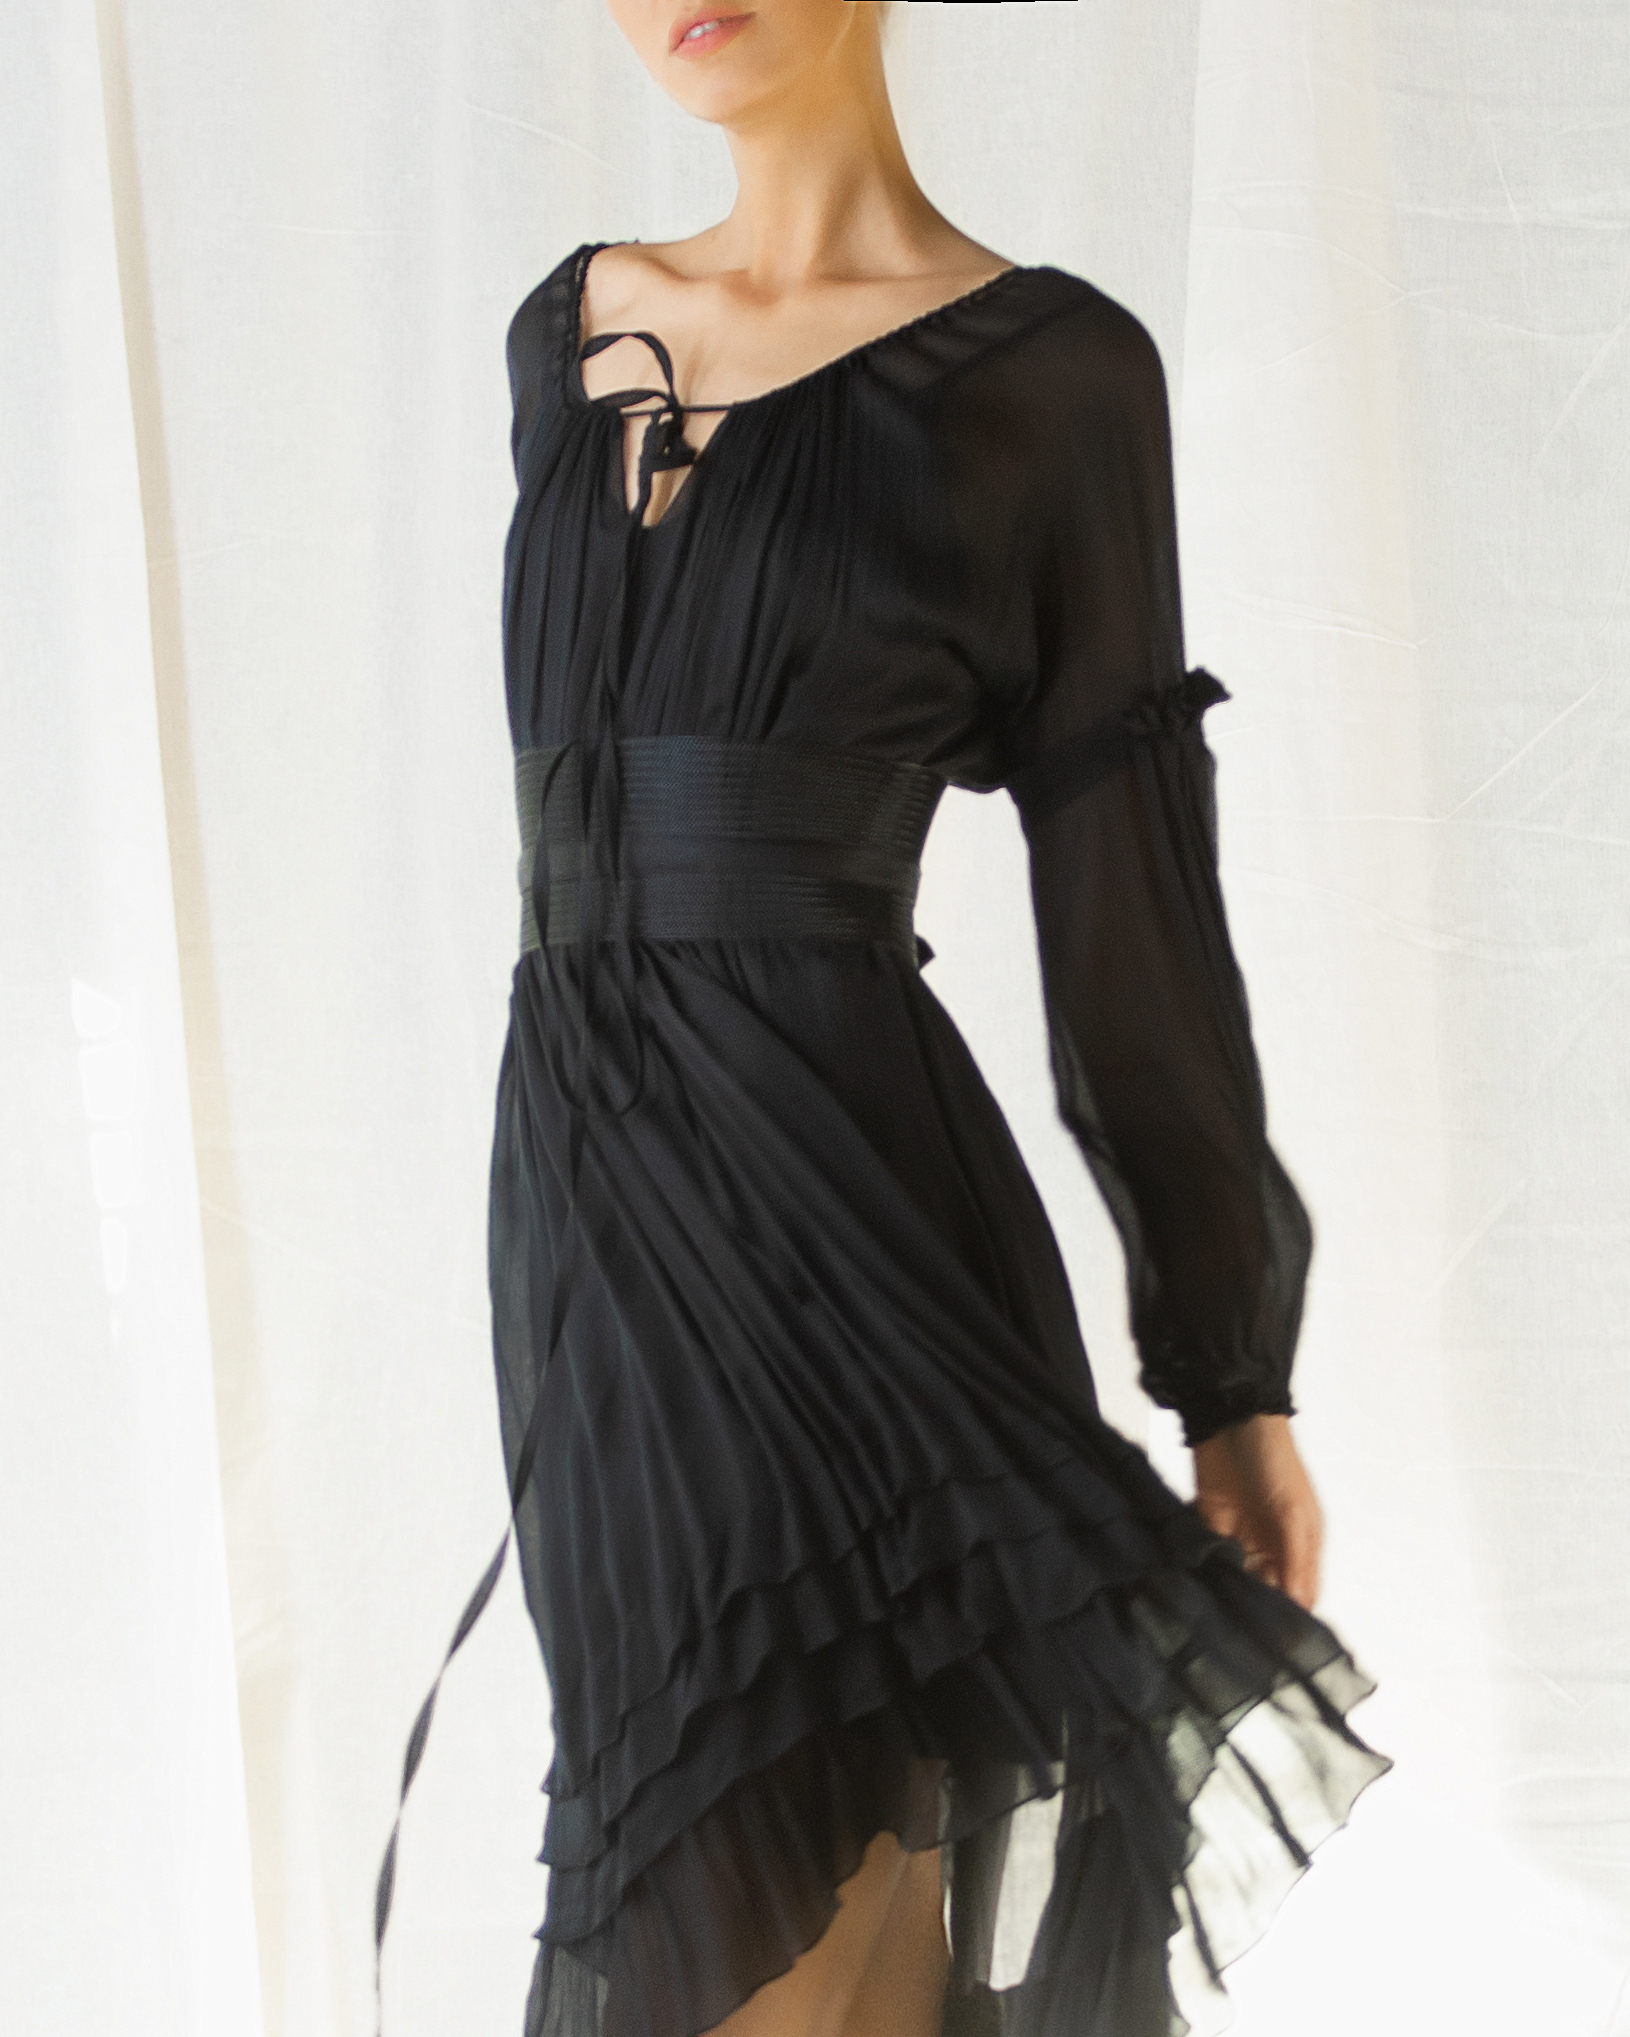 Black silk dress with lace